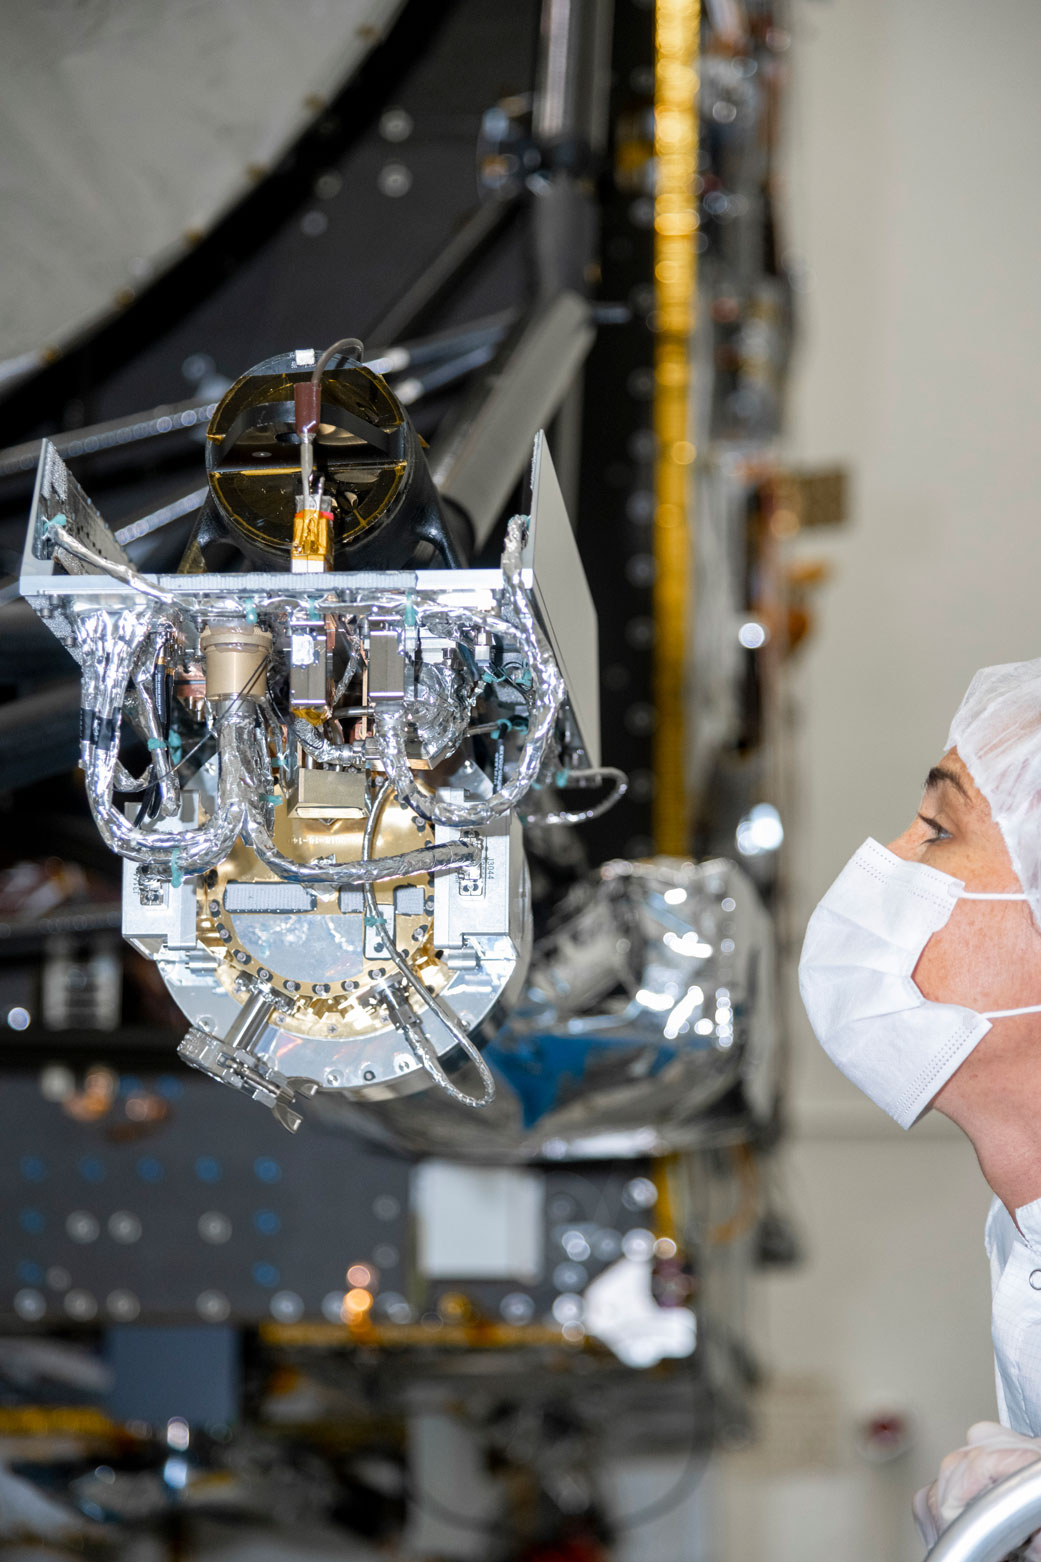 At NASA’s Jet Propulsion Laboratory, an engineer inspects the gamma ray and neutron spectrometer as it is integrated into the agency’s Psyche spacecraft.